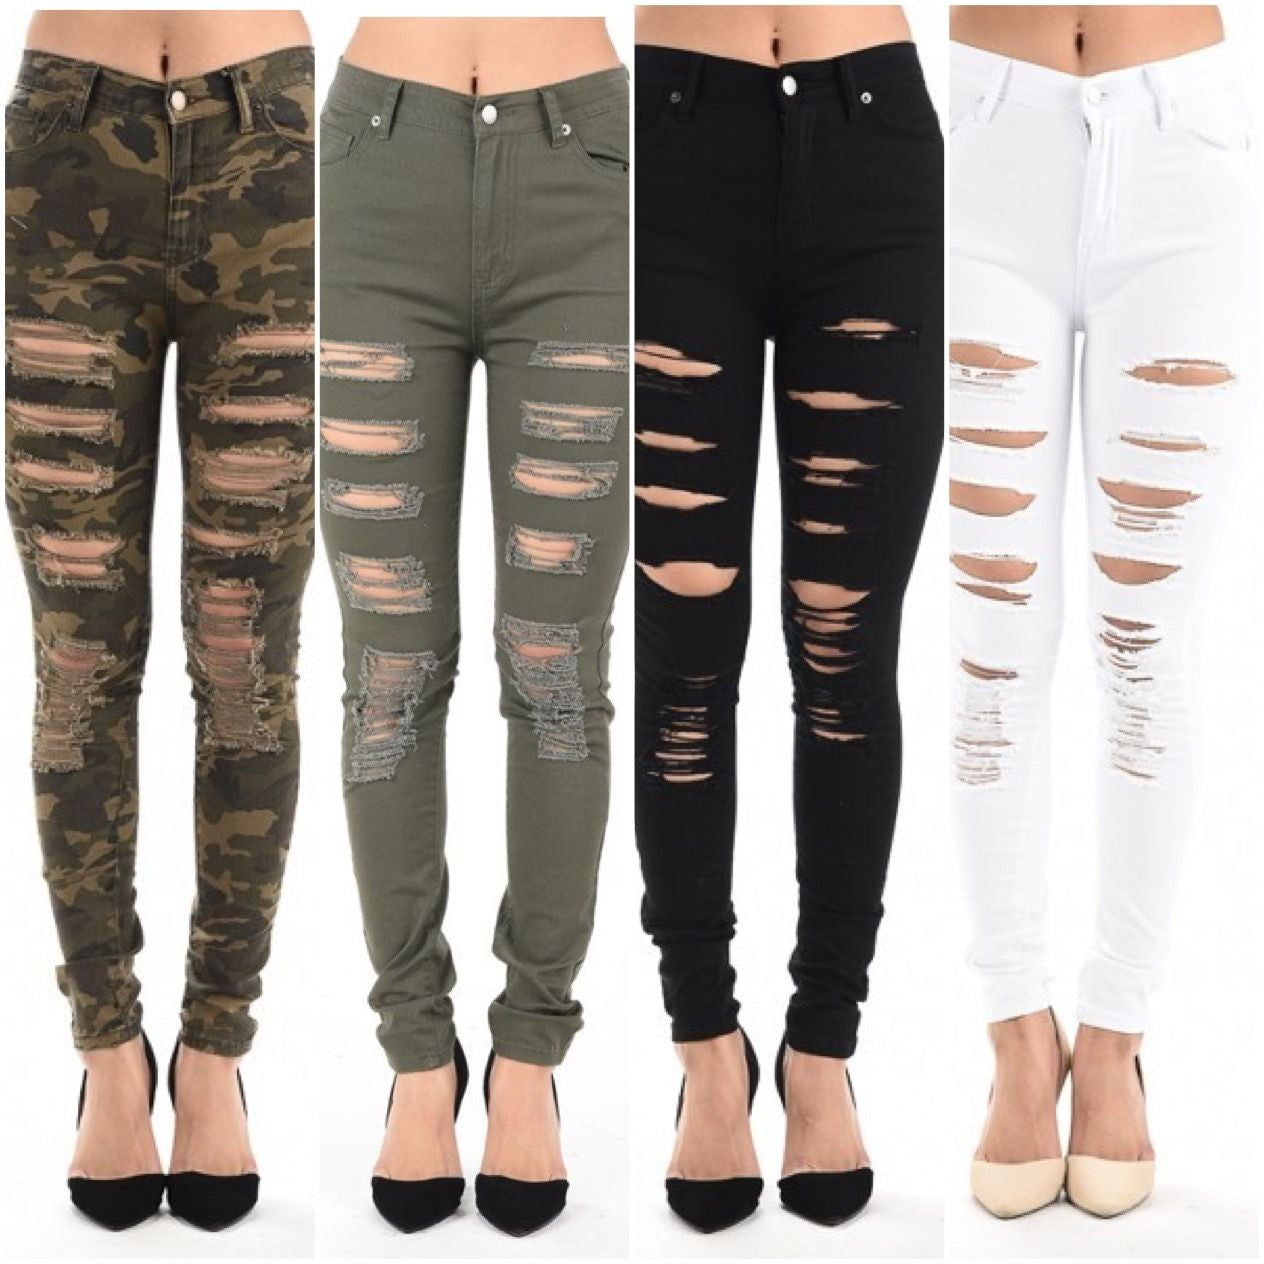 Plus High Waist Pants Ripped Destroyed Skinny Jeans Stretch Legging Camo Army